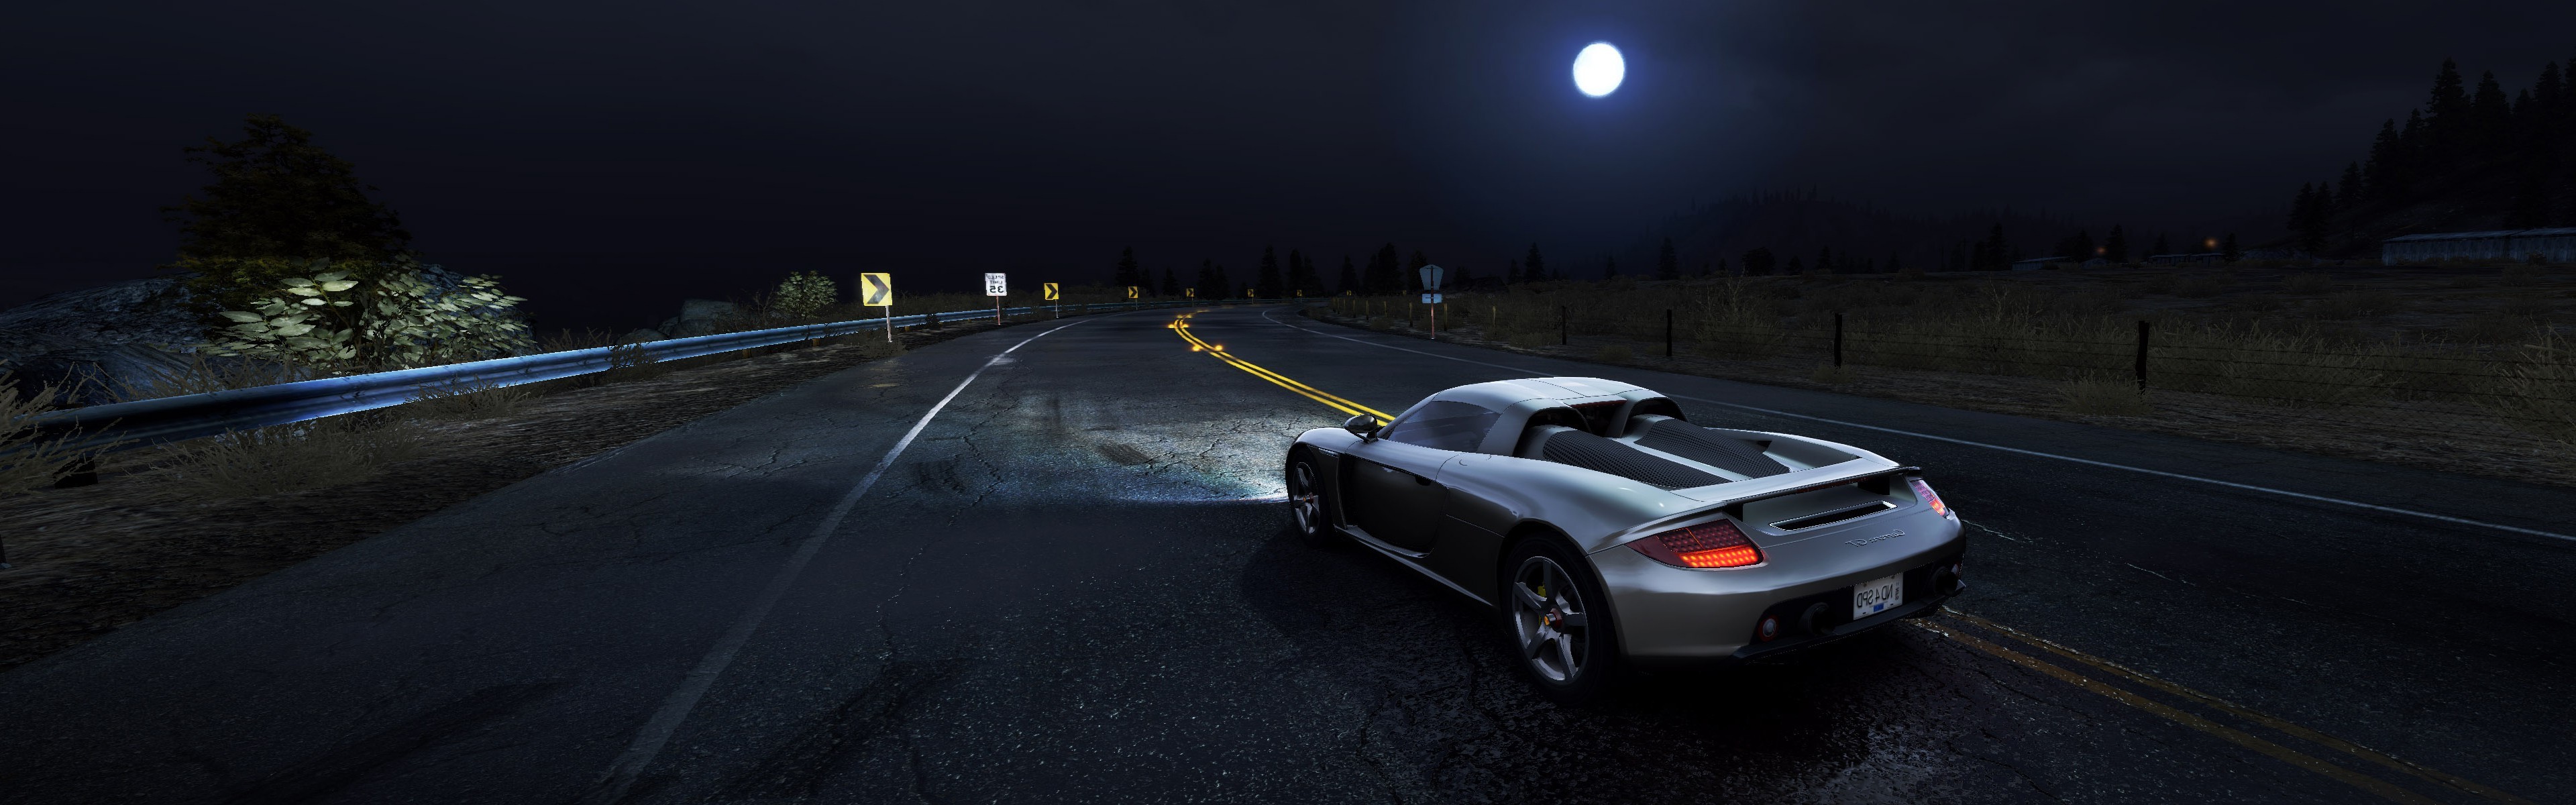 Need For Speed: Hot Pursuit, Car, Porsche Carrera GT, Night, Road, Video Games, Multiple Display, Need For Speed Wallpaper